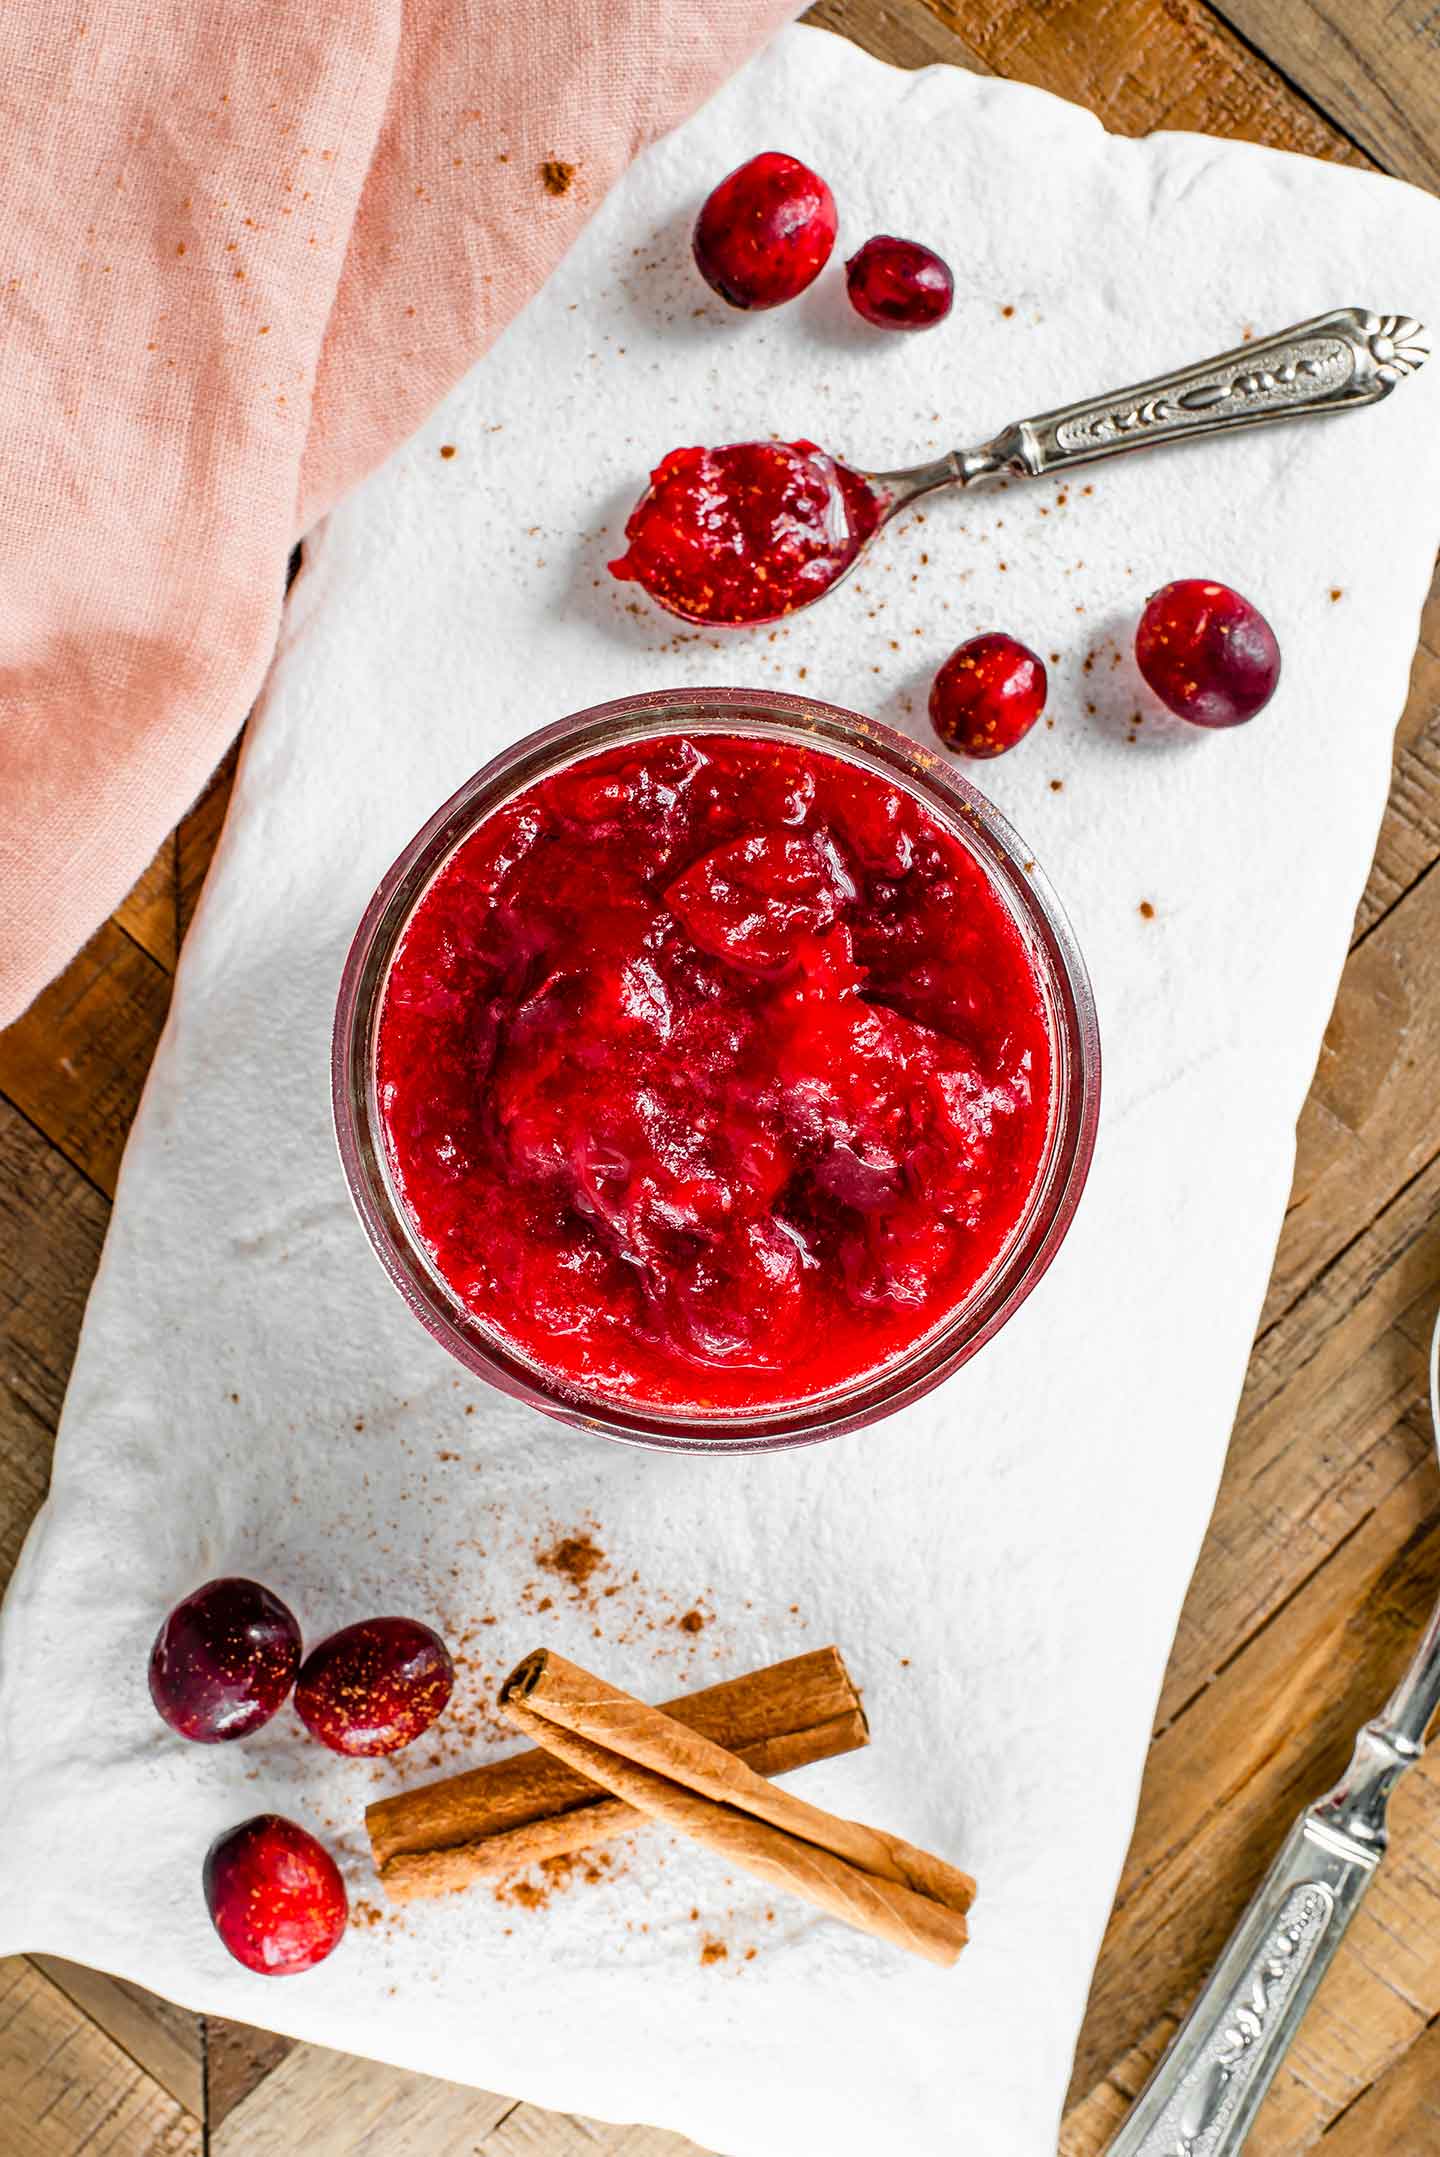 Top down view of deeply red cranberry sauce filling a glass jar. The sauce is thick with the cooked cranberries nicely softened and mashed. Cinnamon sticks and fresh cranberries surround the glass jar on a white tray.